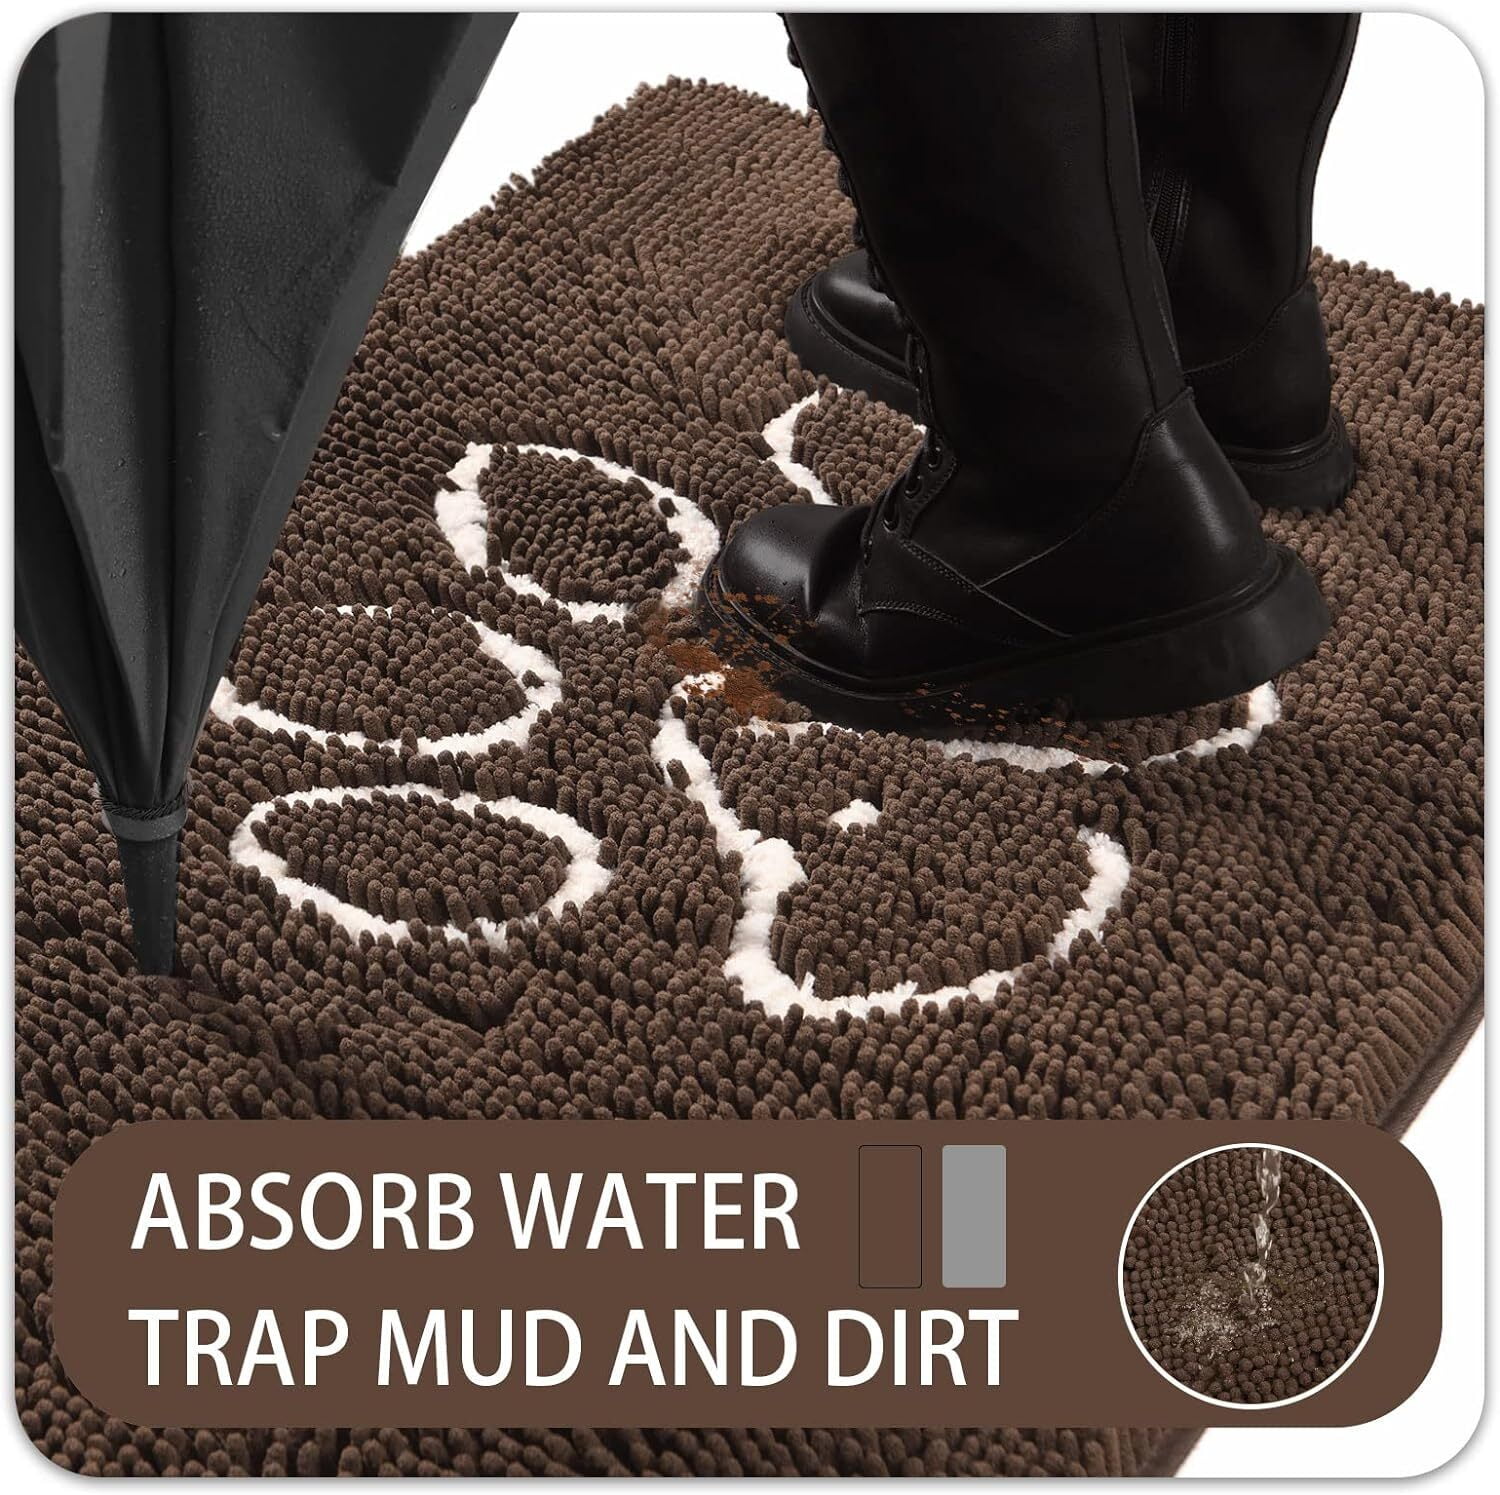 Keep dirt, water, mud and muck outside where they belong. Our superdurable,  American-made rugs are designe…